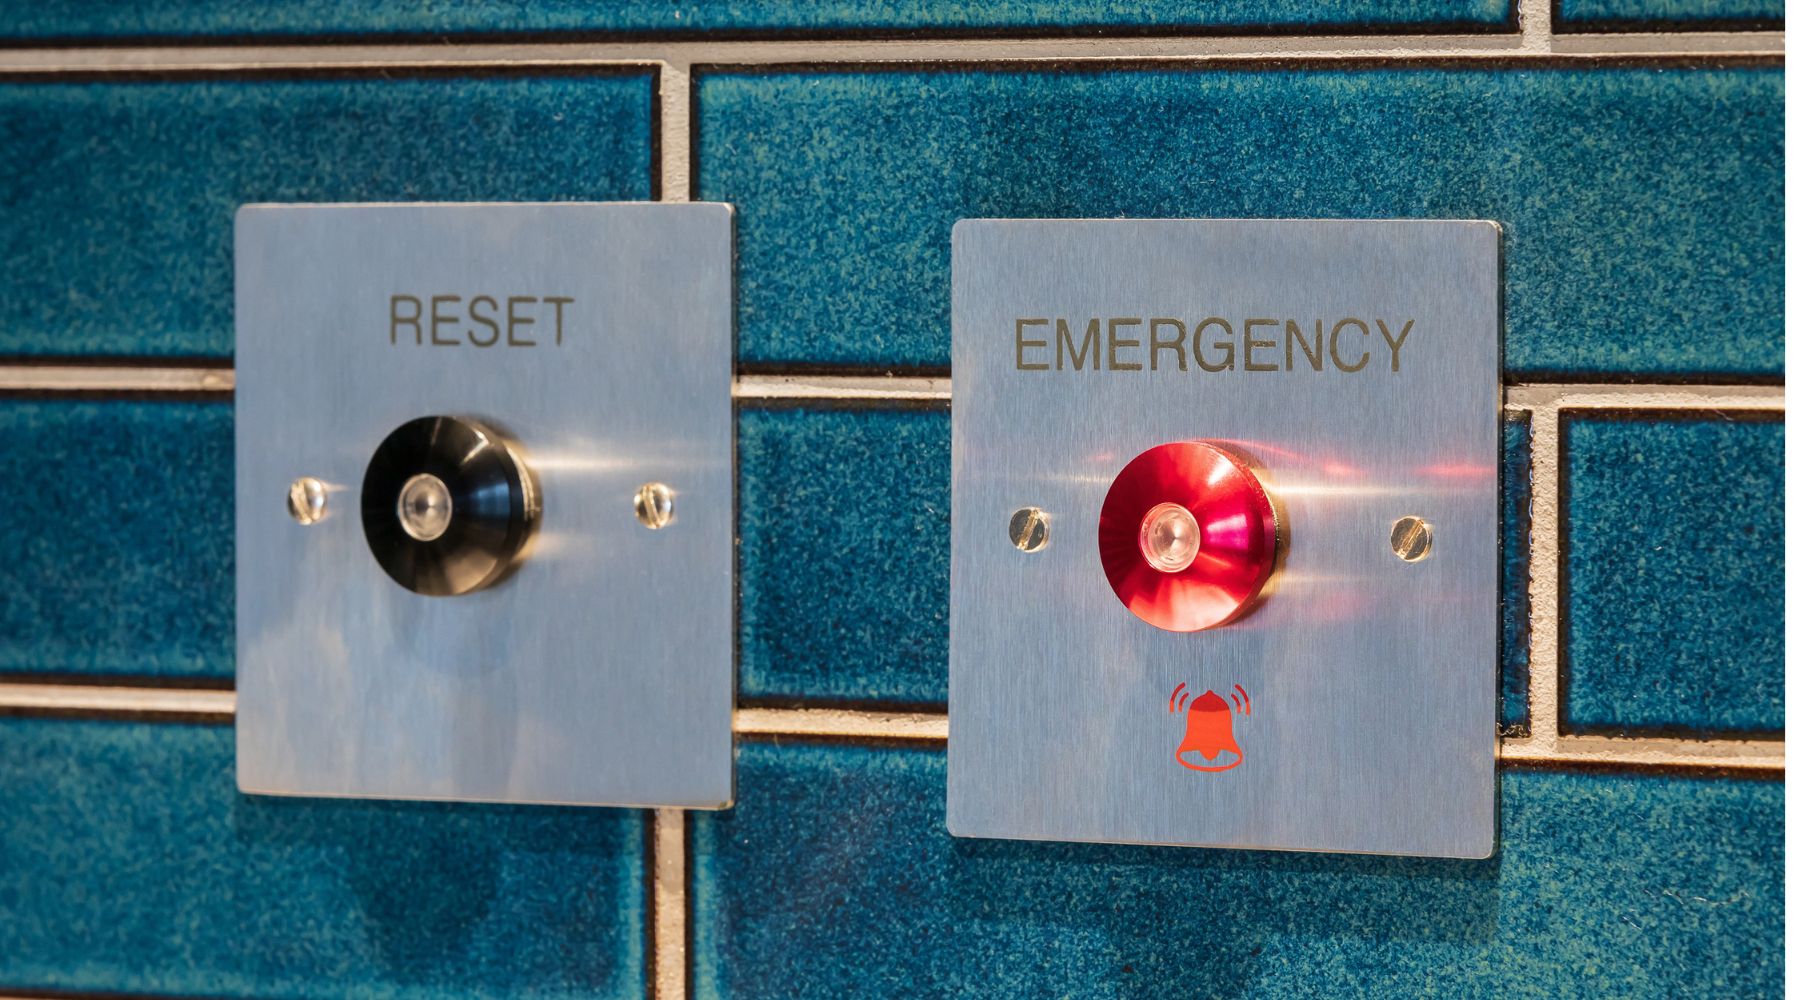 Emergency push button alarms against stylish blue tiles